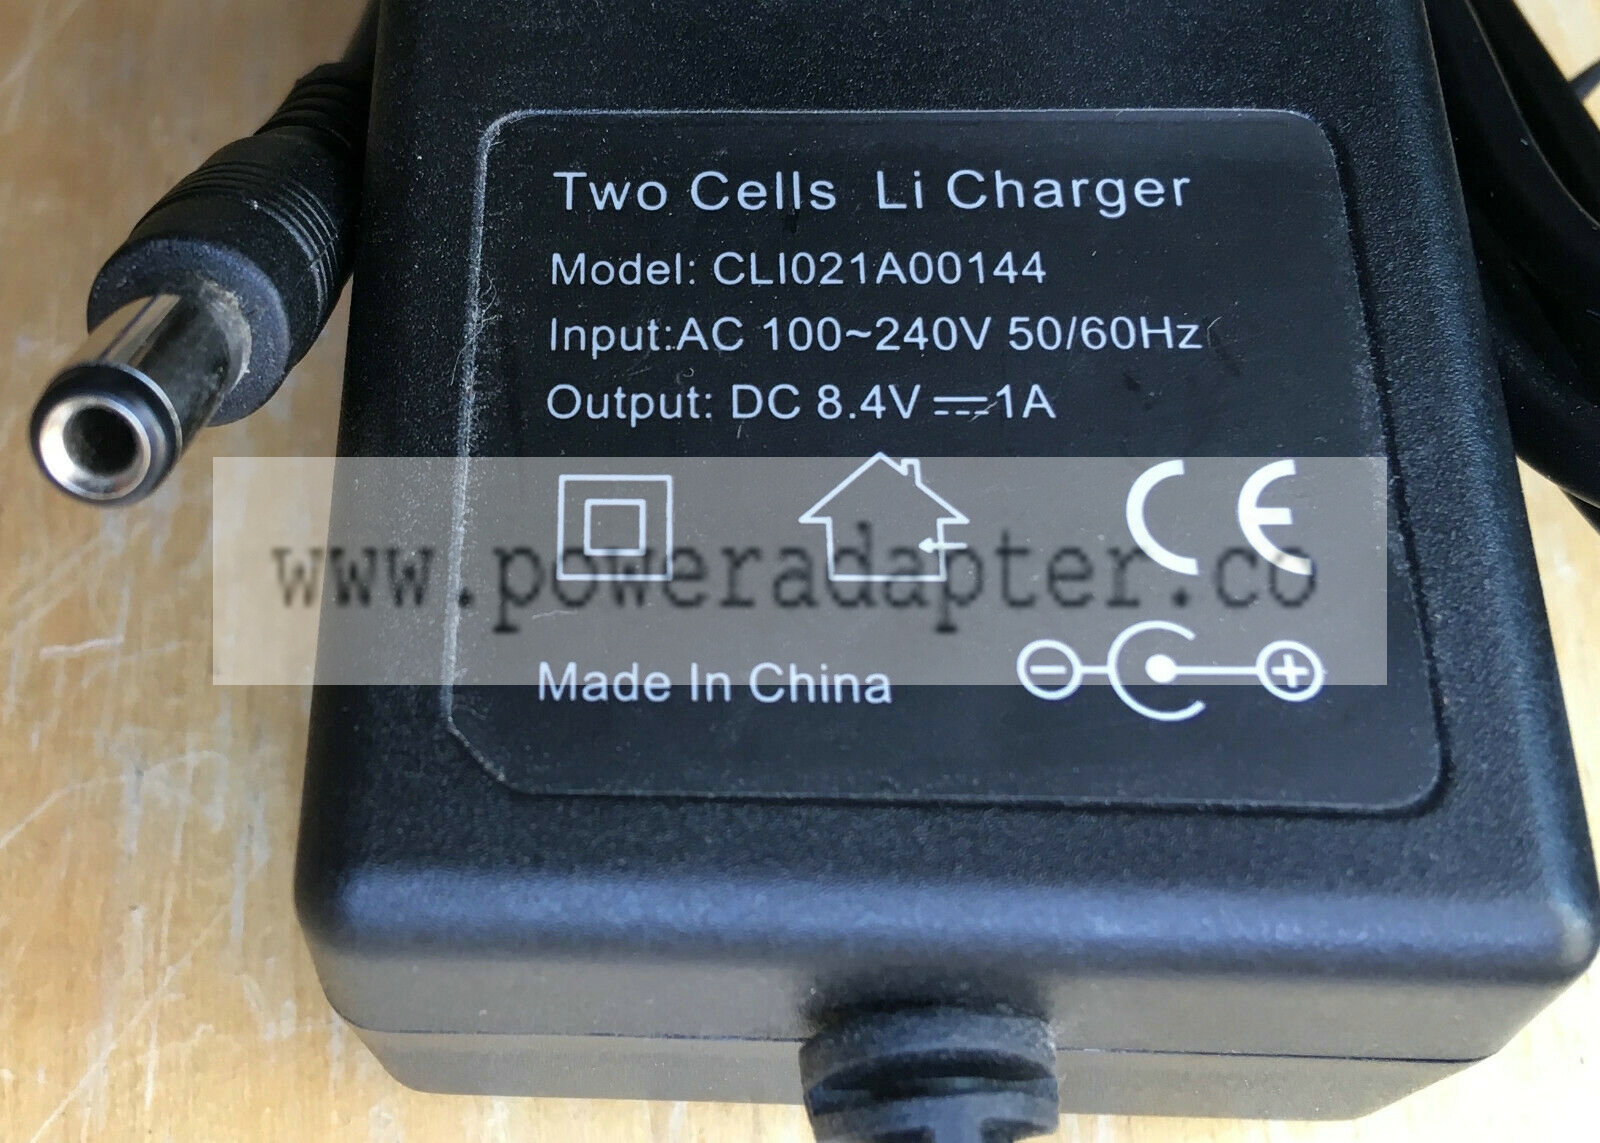 Two Cells LI 8.4V DC 1A Charger CLI021A00144 for Bike Light Two Cells LI 8.4V DC 1A Charger CLI021A00144 for Bike Lig